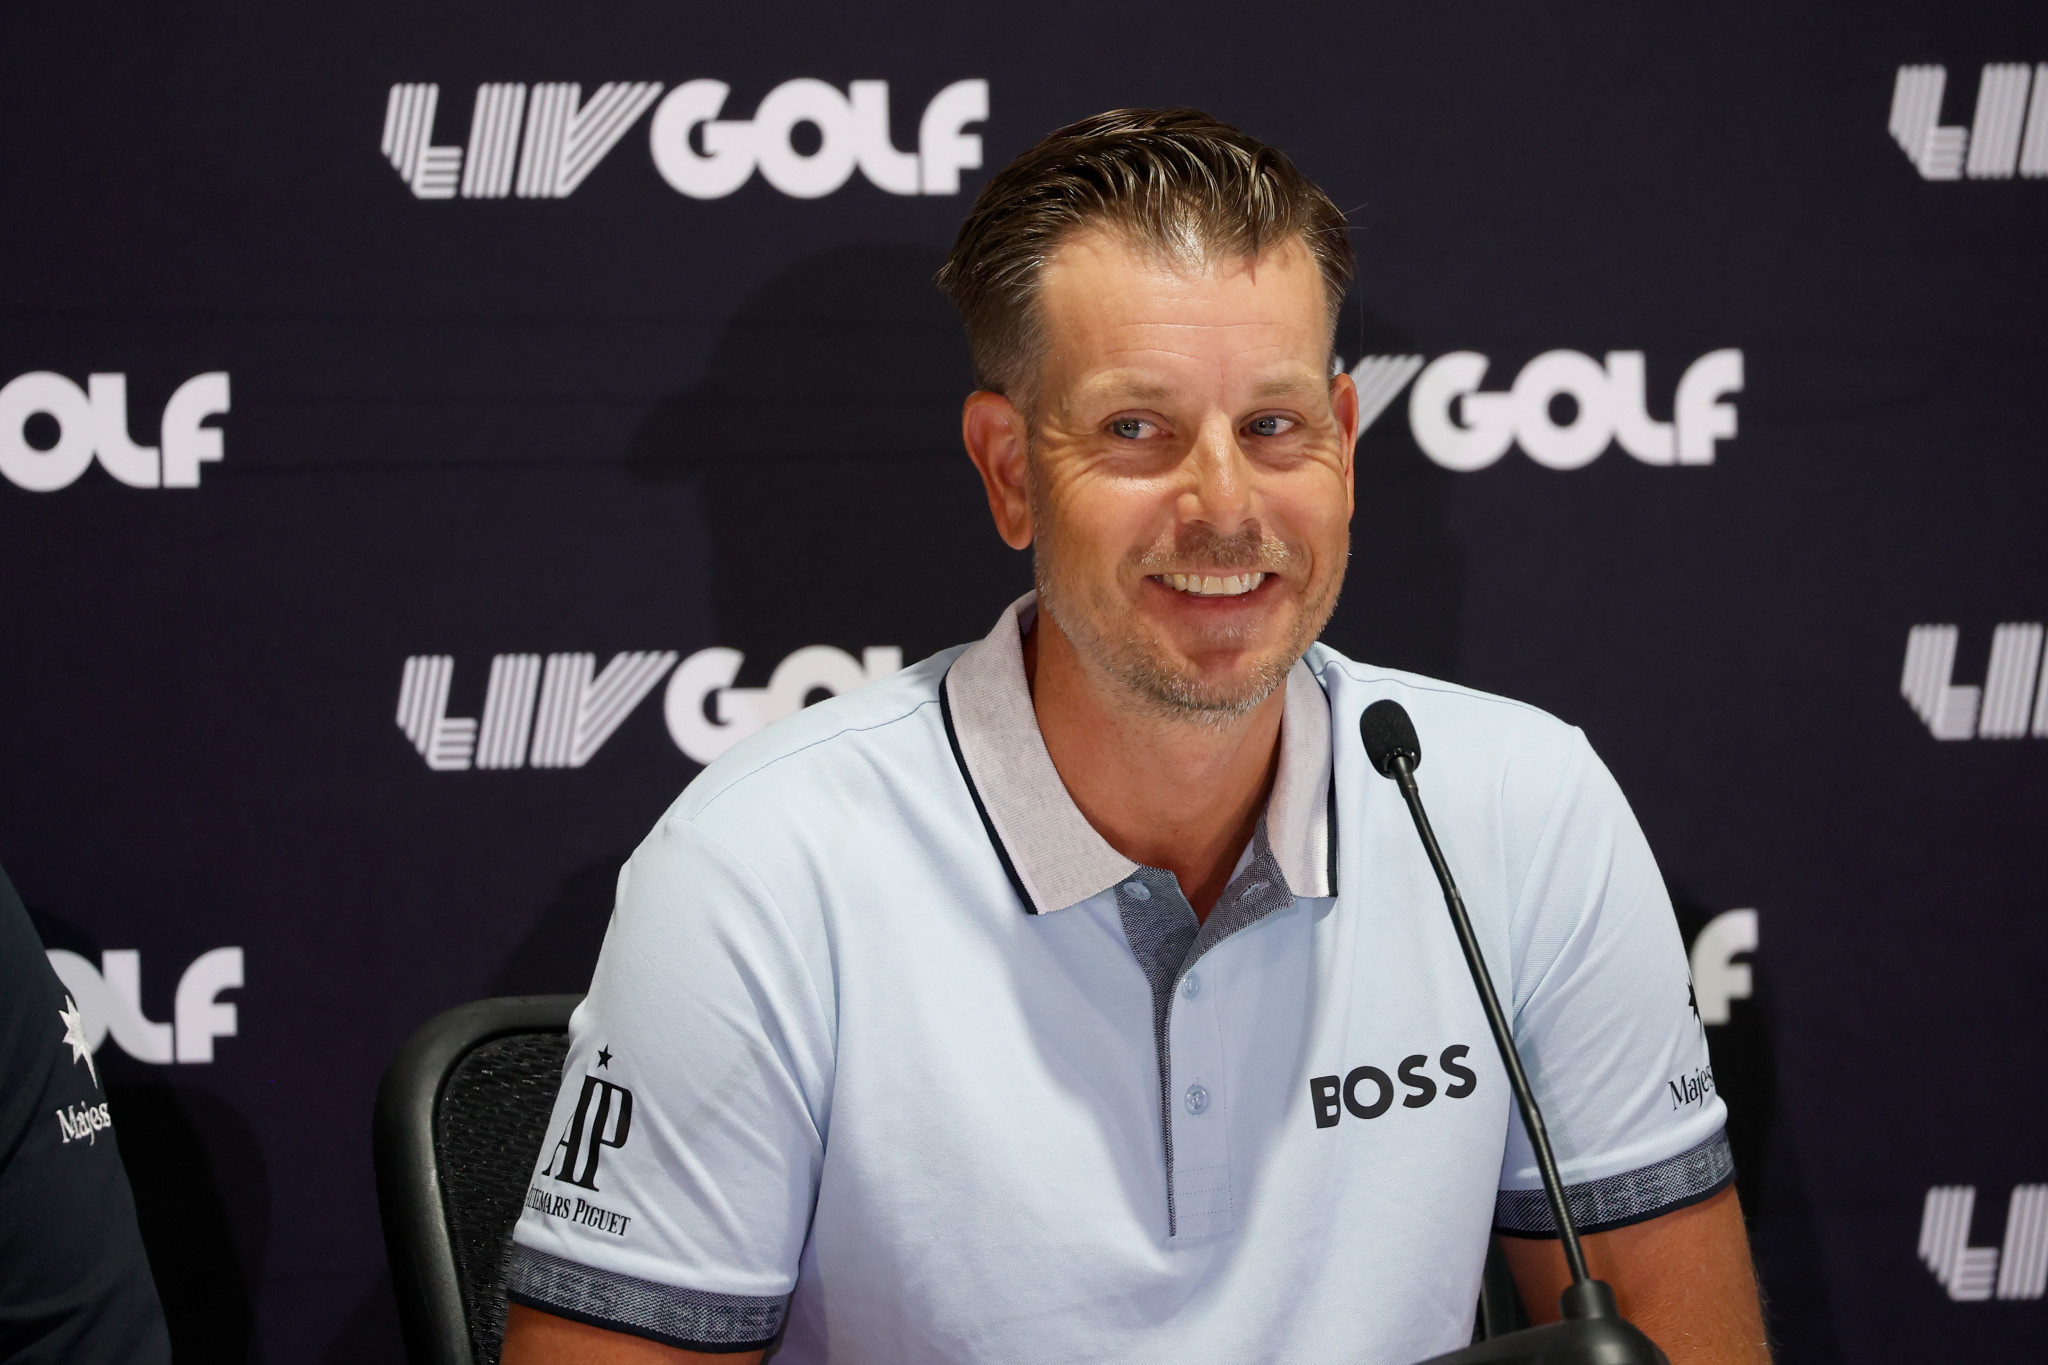 Swedish Golf Federation cuts ties with Stenson after LIV Golf move